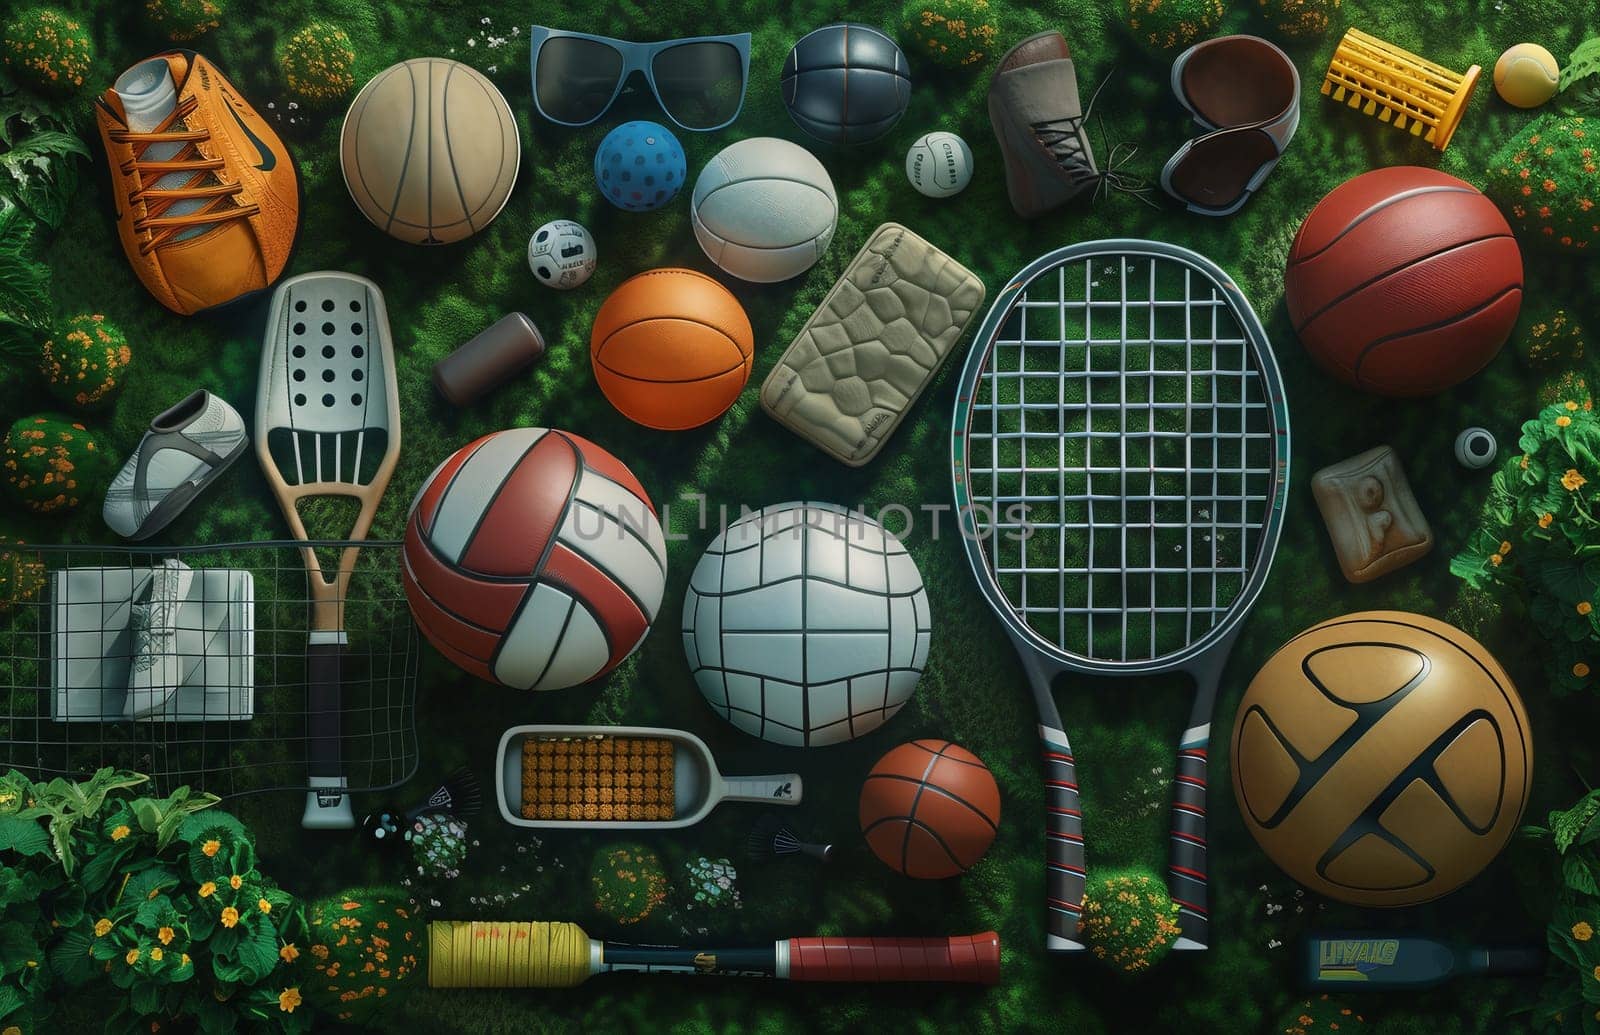 Sport games background - basketball, soccer ball, rackets, sneakers - copy space by Andelov13